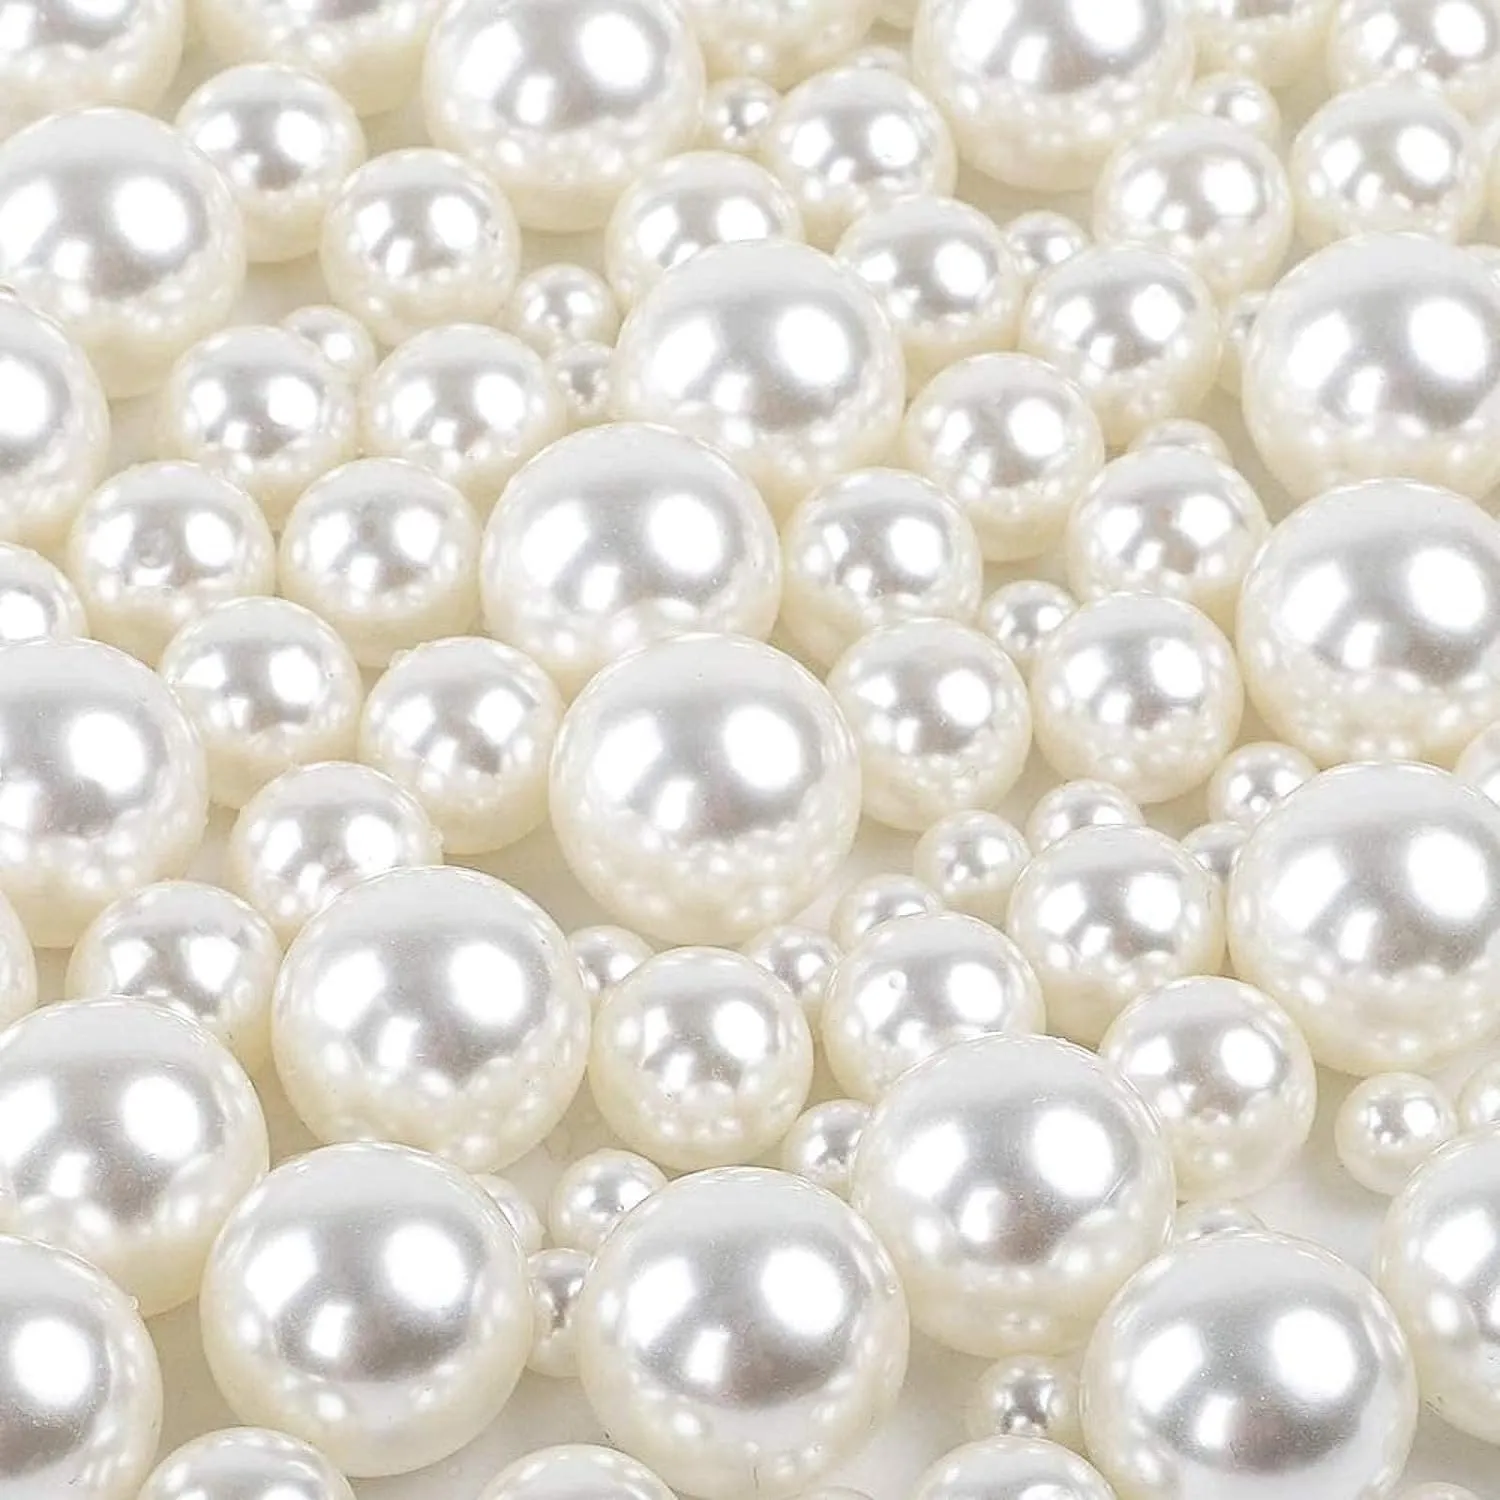 150pcs Pearls for Crafts No Holes, Vase Filler Artificial Plastic Ivory Pearl Beads for Table Scatter, Wedding, Birthday Party, Home Decoration(8mm, 14mm, 20mm)